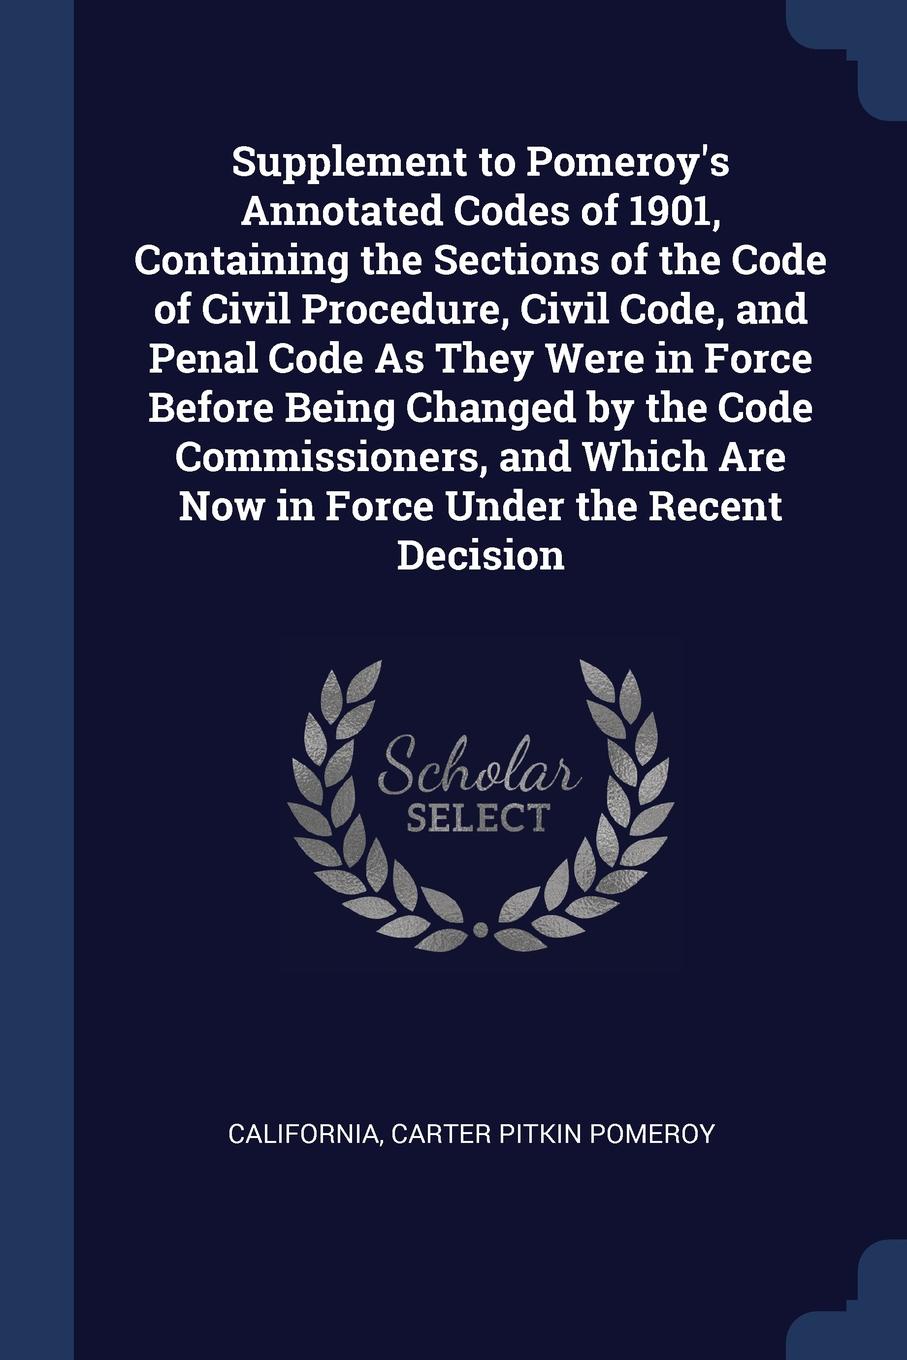 Supplement to Pomeroy`s Annotated Codes of 1901, Containing the Sections of the Code of Civil Procedure, Civil Code, and Penal Code As They Were in Force Before Being Changed by the Code Commissioners, and Which Are Now in Force Under the Recent D...